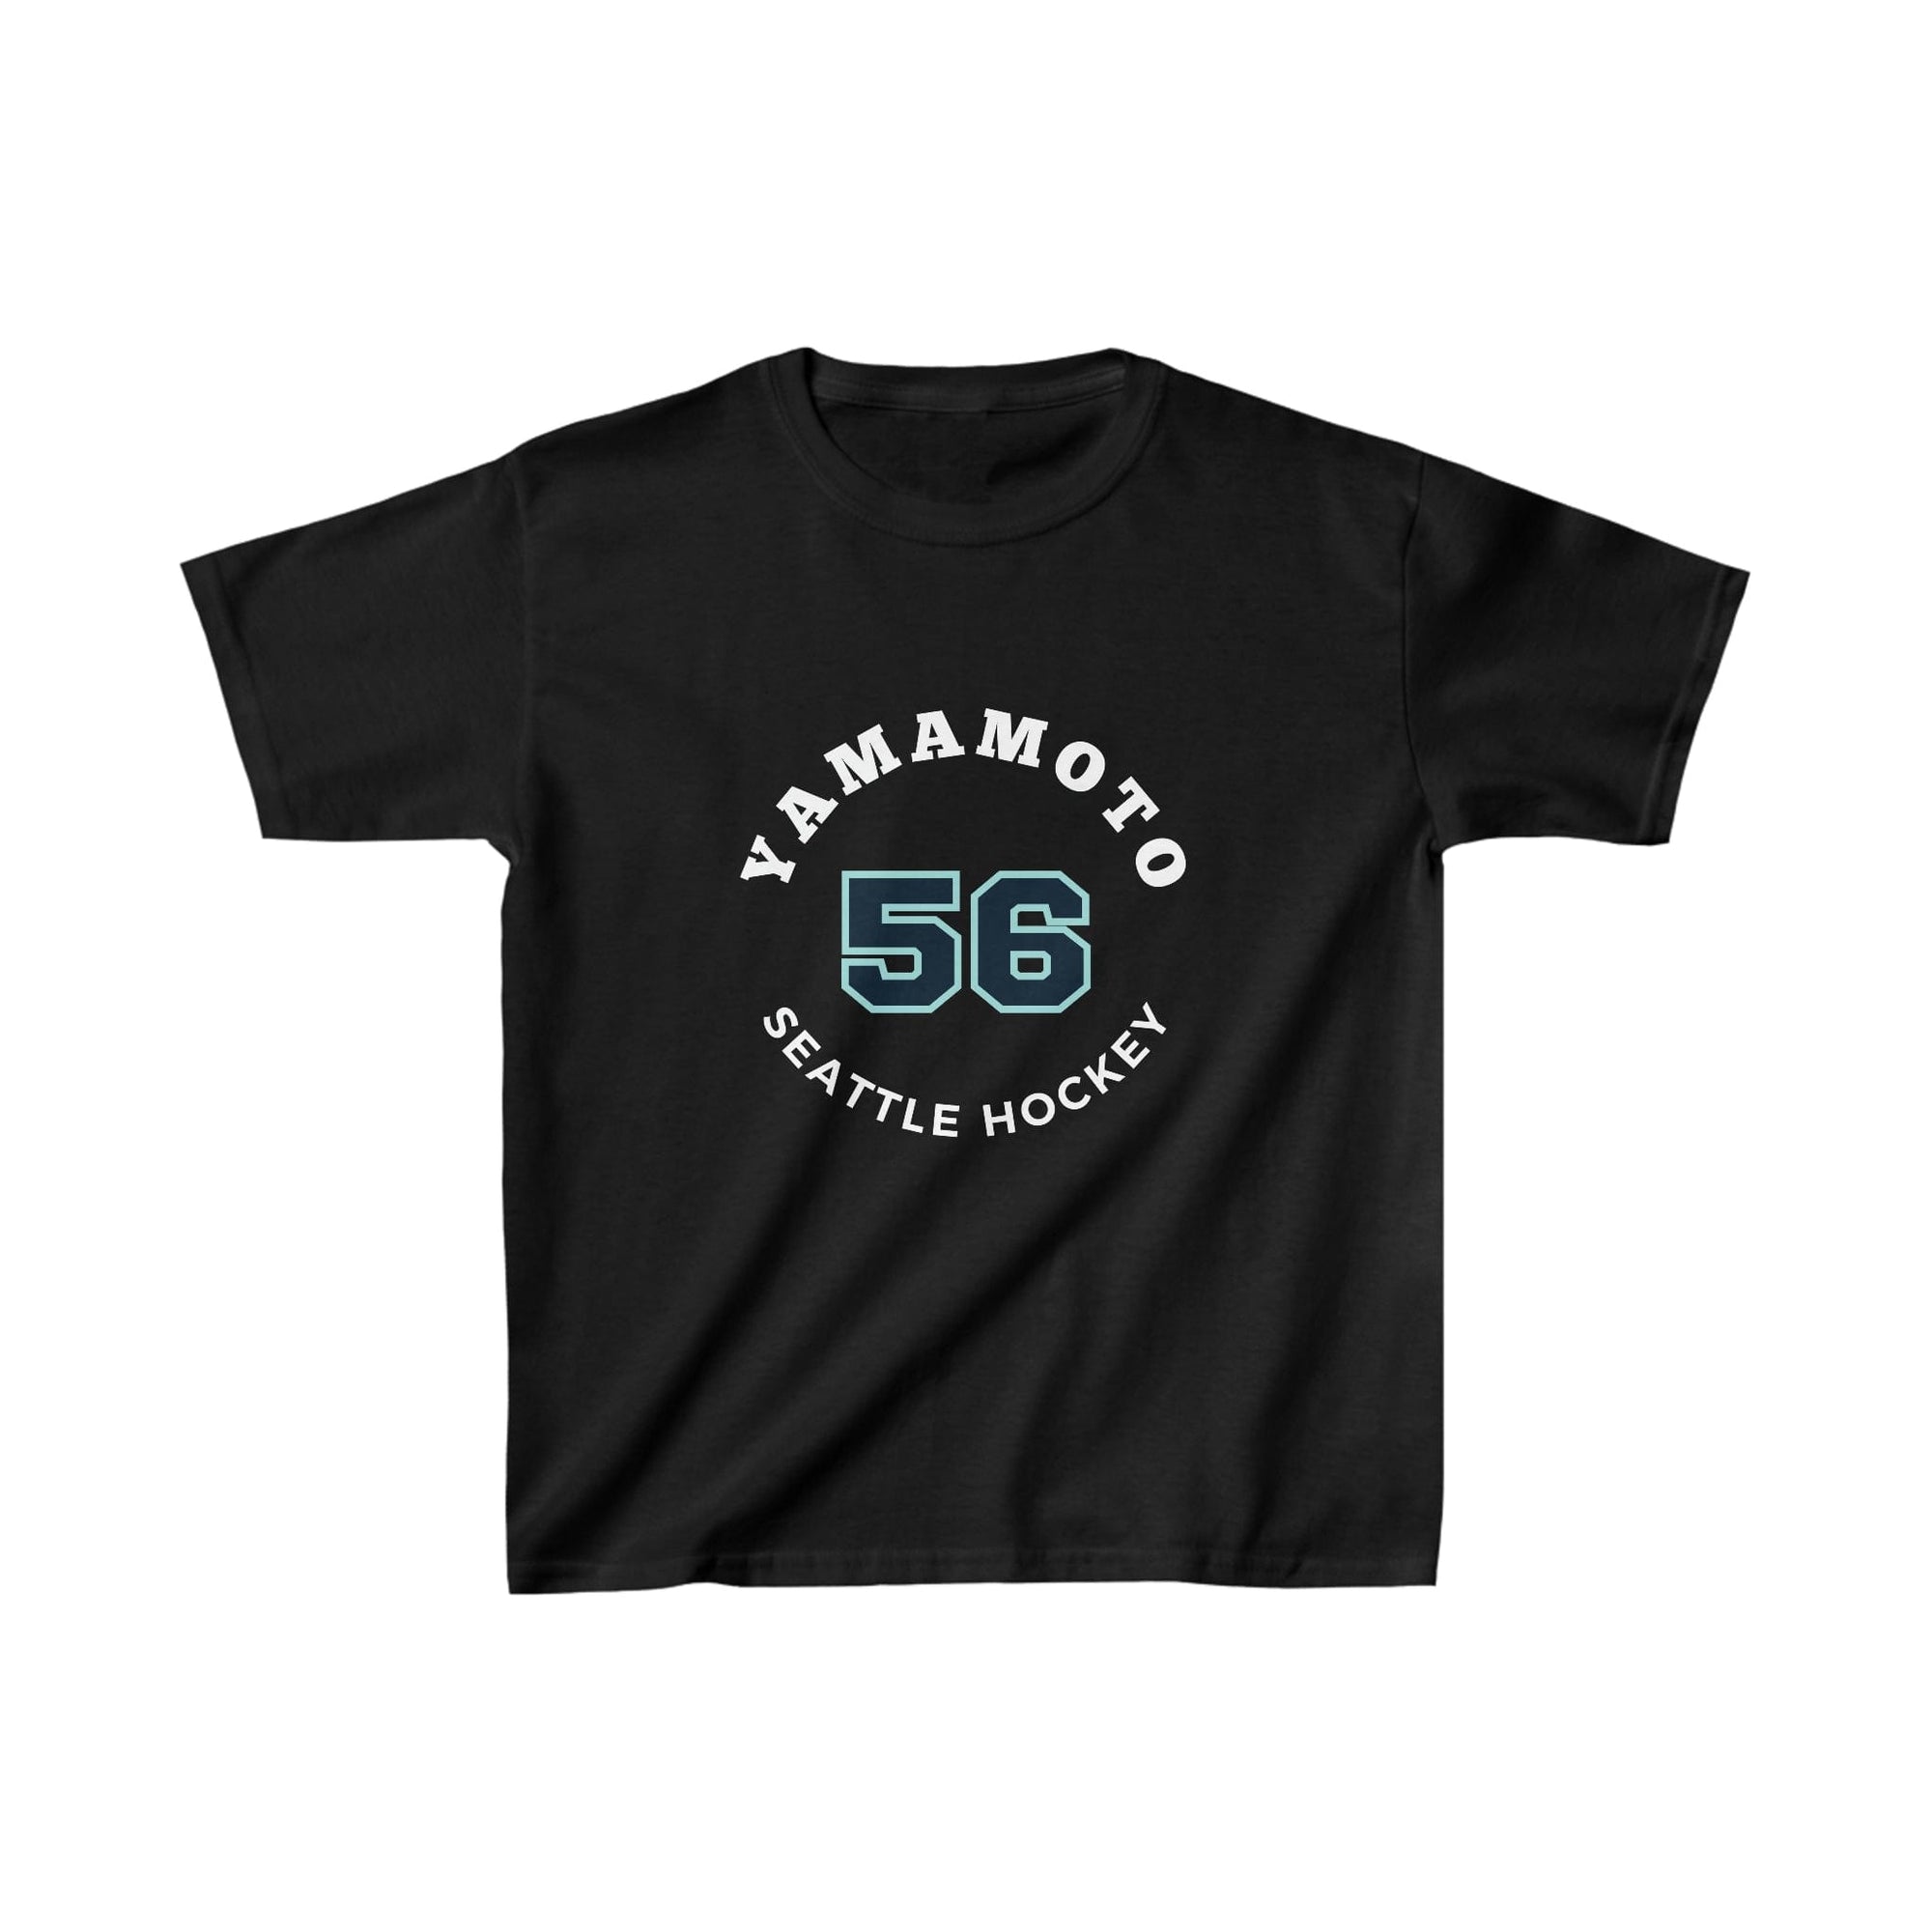 Kids clothes Yamamoto 56 Seattle Hockey Number Arch Design Kids Tee